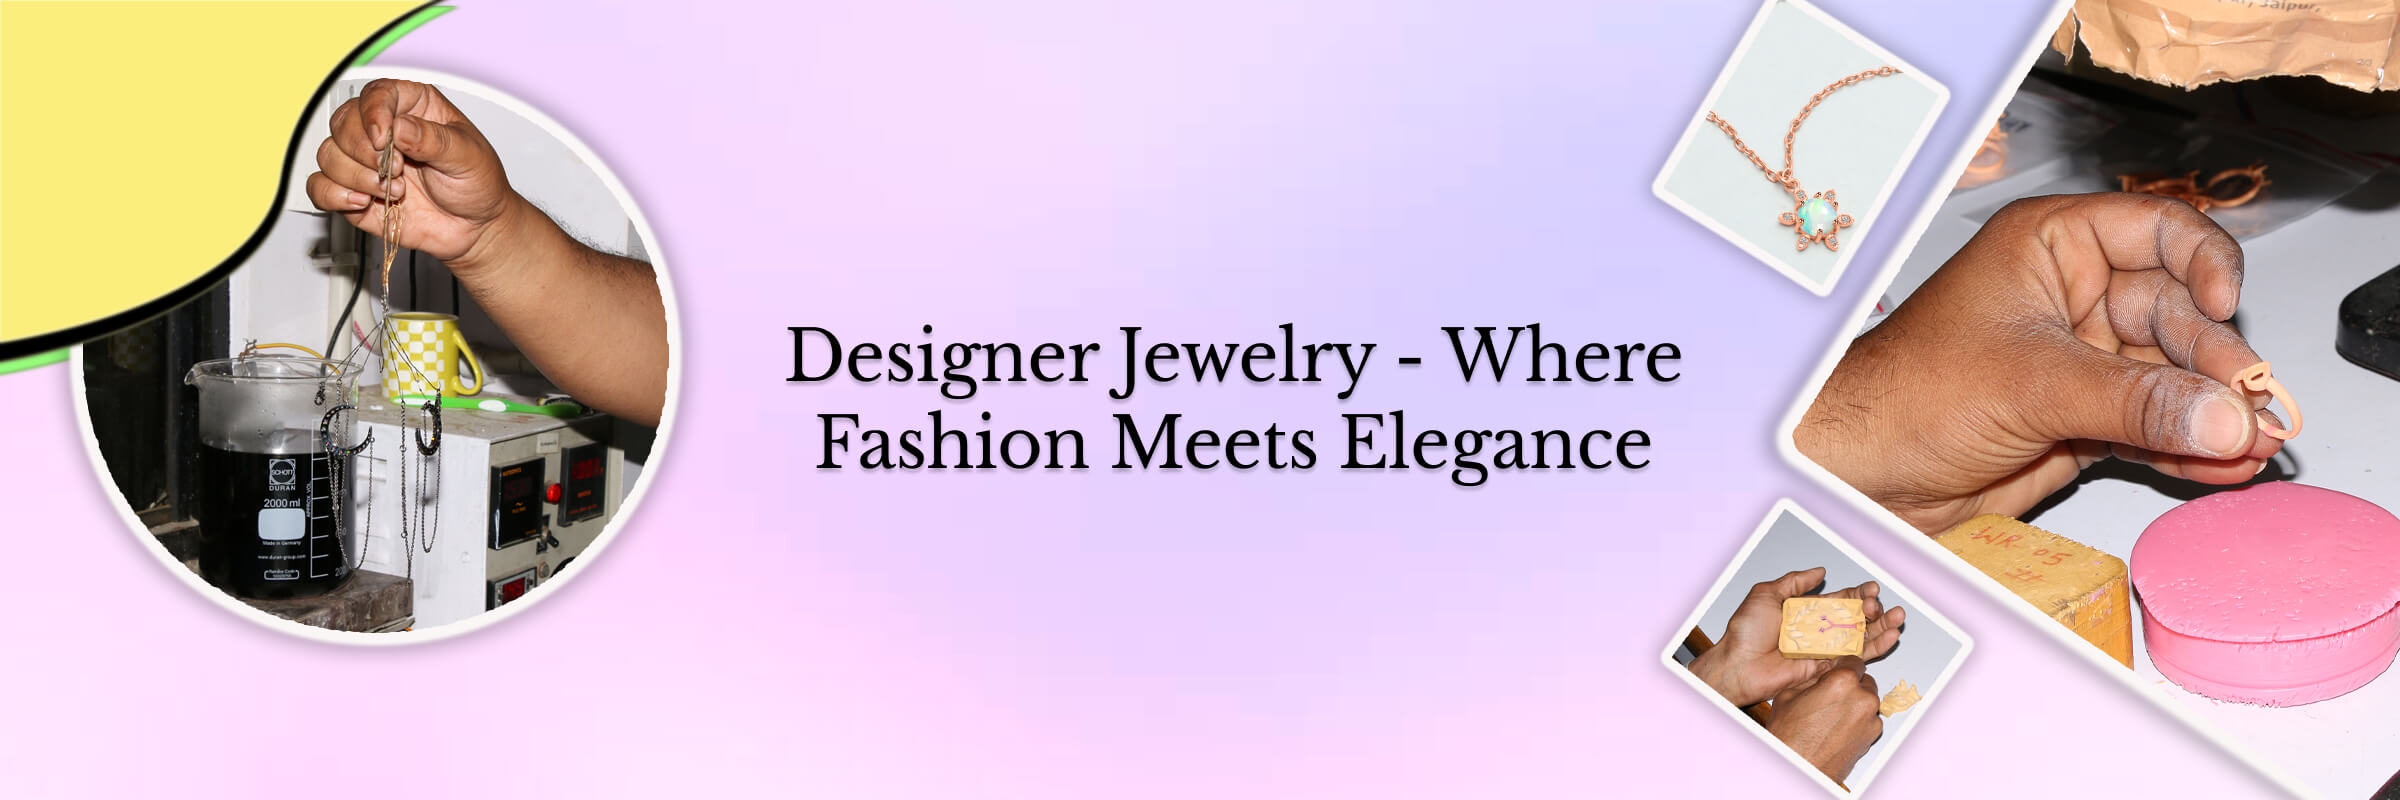 Shopping & Styling for Designer Jewelry